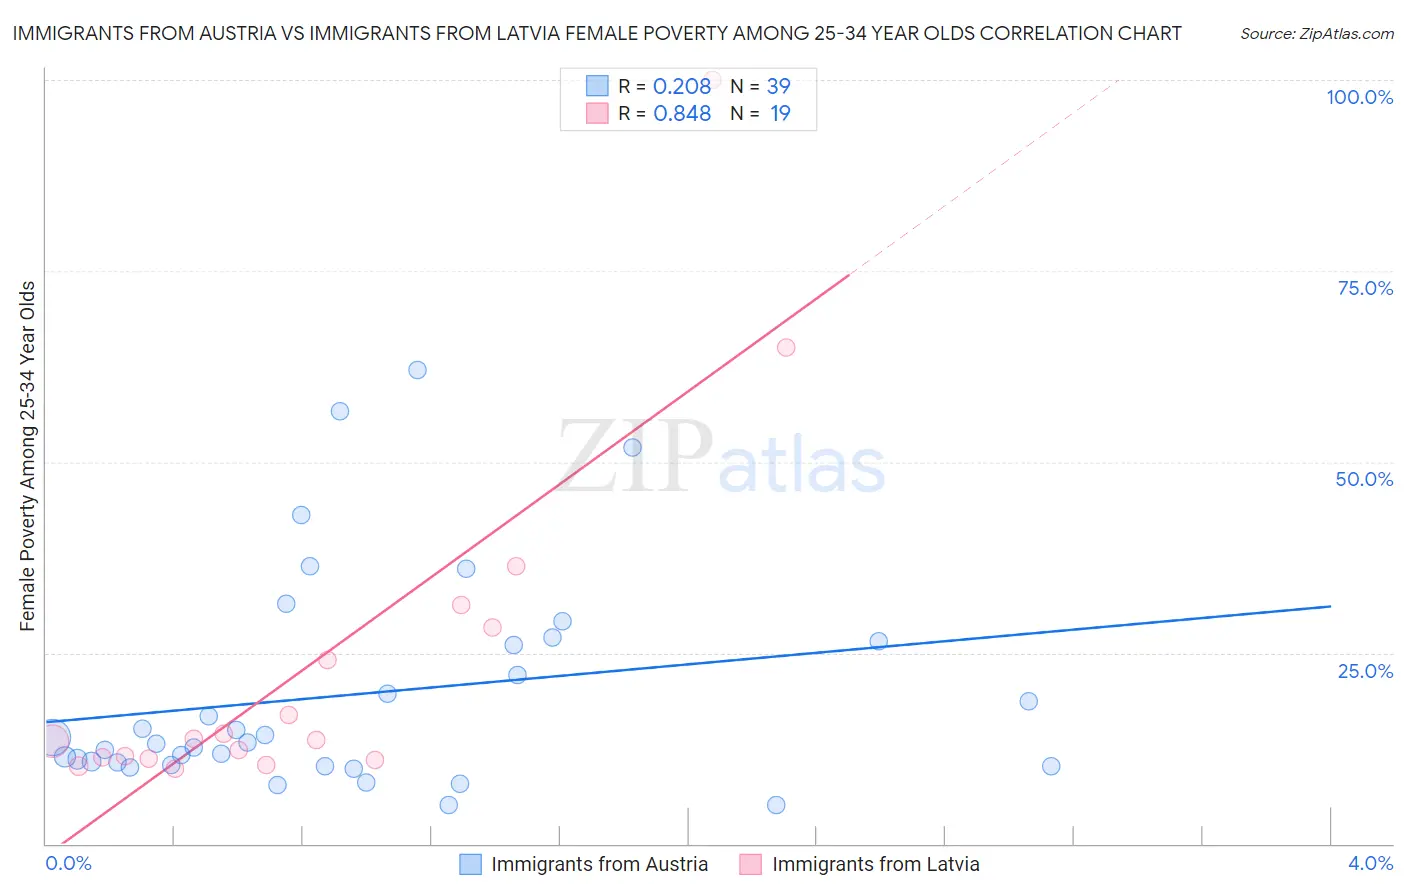 Immigrants from Austria vs Immigrants from Latvia Female Poverty Among 25-34 Year Olds